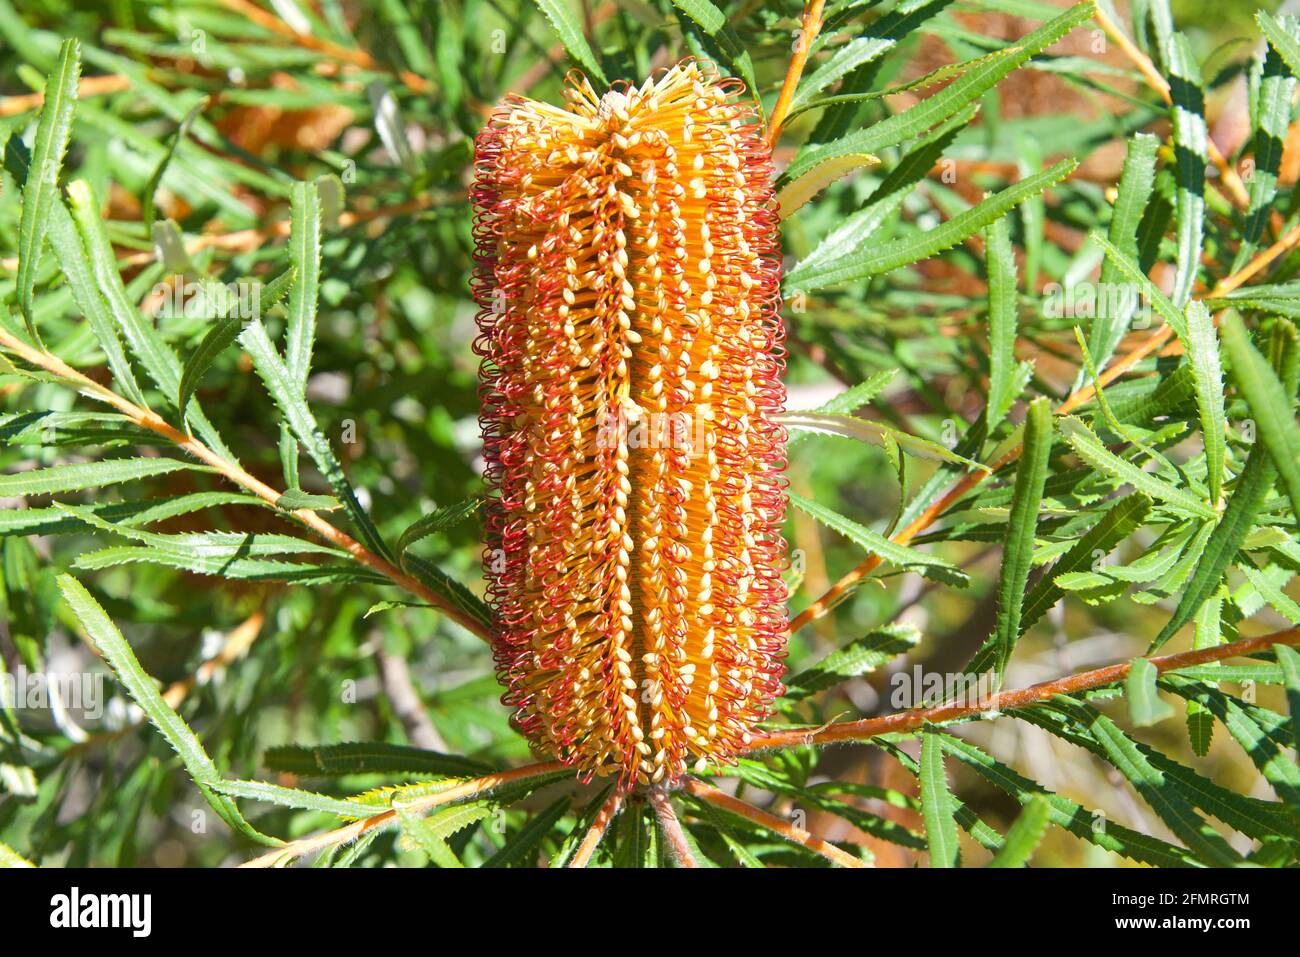 Hairpin banksia flower cone growing upwards from the tree branches. The distinctive inflorescences or flower spikes occur over a short period through Stock Photo